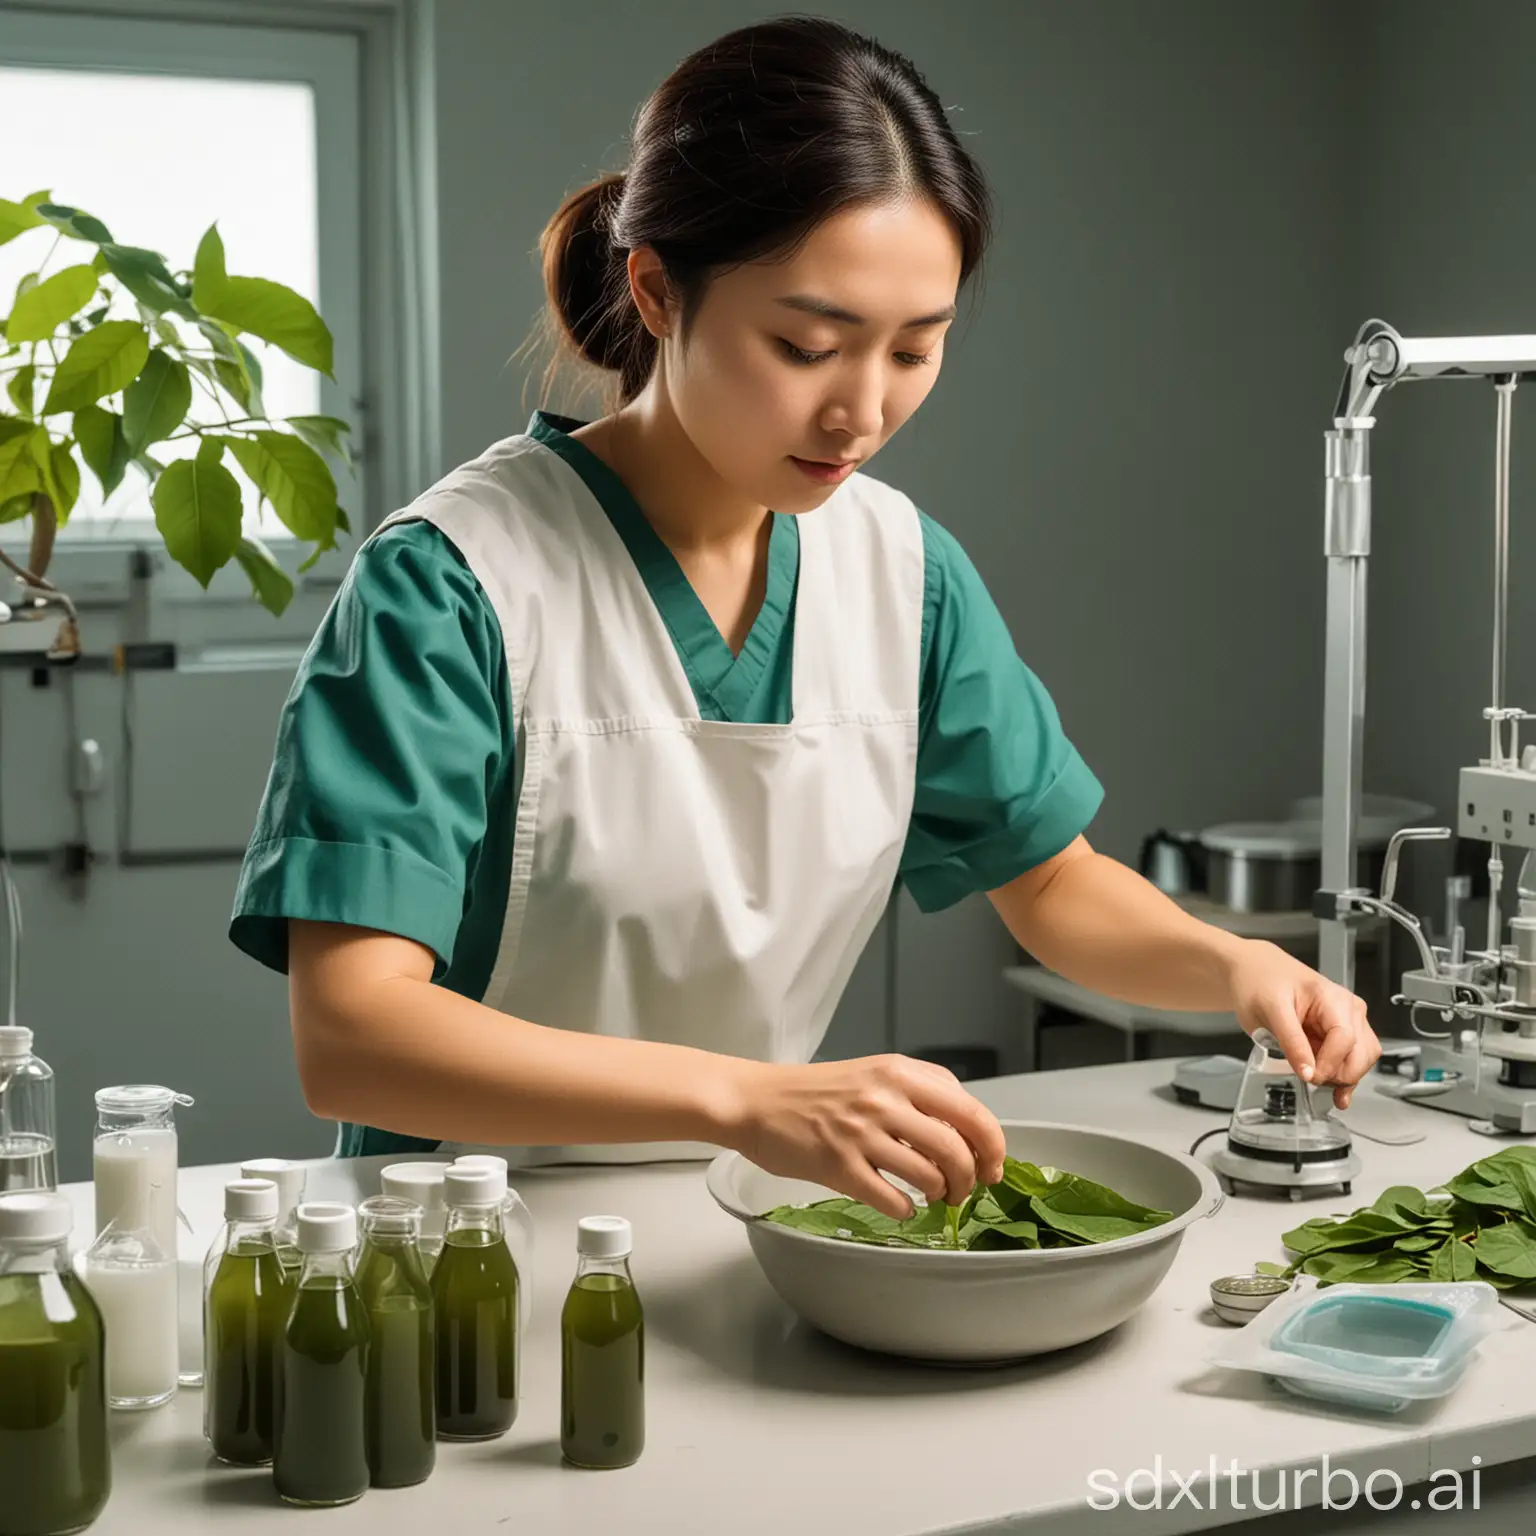 "An illustration detailing the extraction process from pawpaw leaves, in which a Korean woman starts by soaking 100 g of pawpaw leaves in 1 litre of 10%20 hydrogen peroxide solution and stirring for 60 minutes. The soaked leaves are then sonicated at 40 kHz for 30 minutes for primary extraction. After the primary extraction, the extract is irradiated with 50 kGy of gamma radiation for a secondary extraction. The final step is to obtain the pawpaw extract through filtration and concentration. The scene is set in a scientific laboratory, with various laboratory equipment depicted."